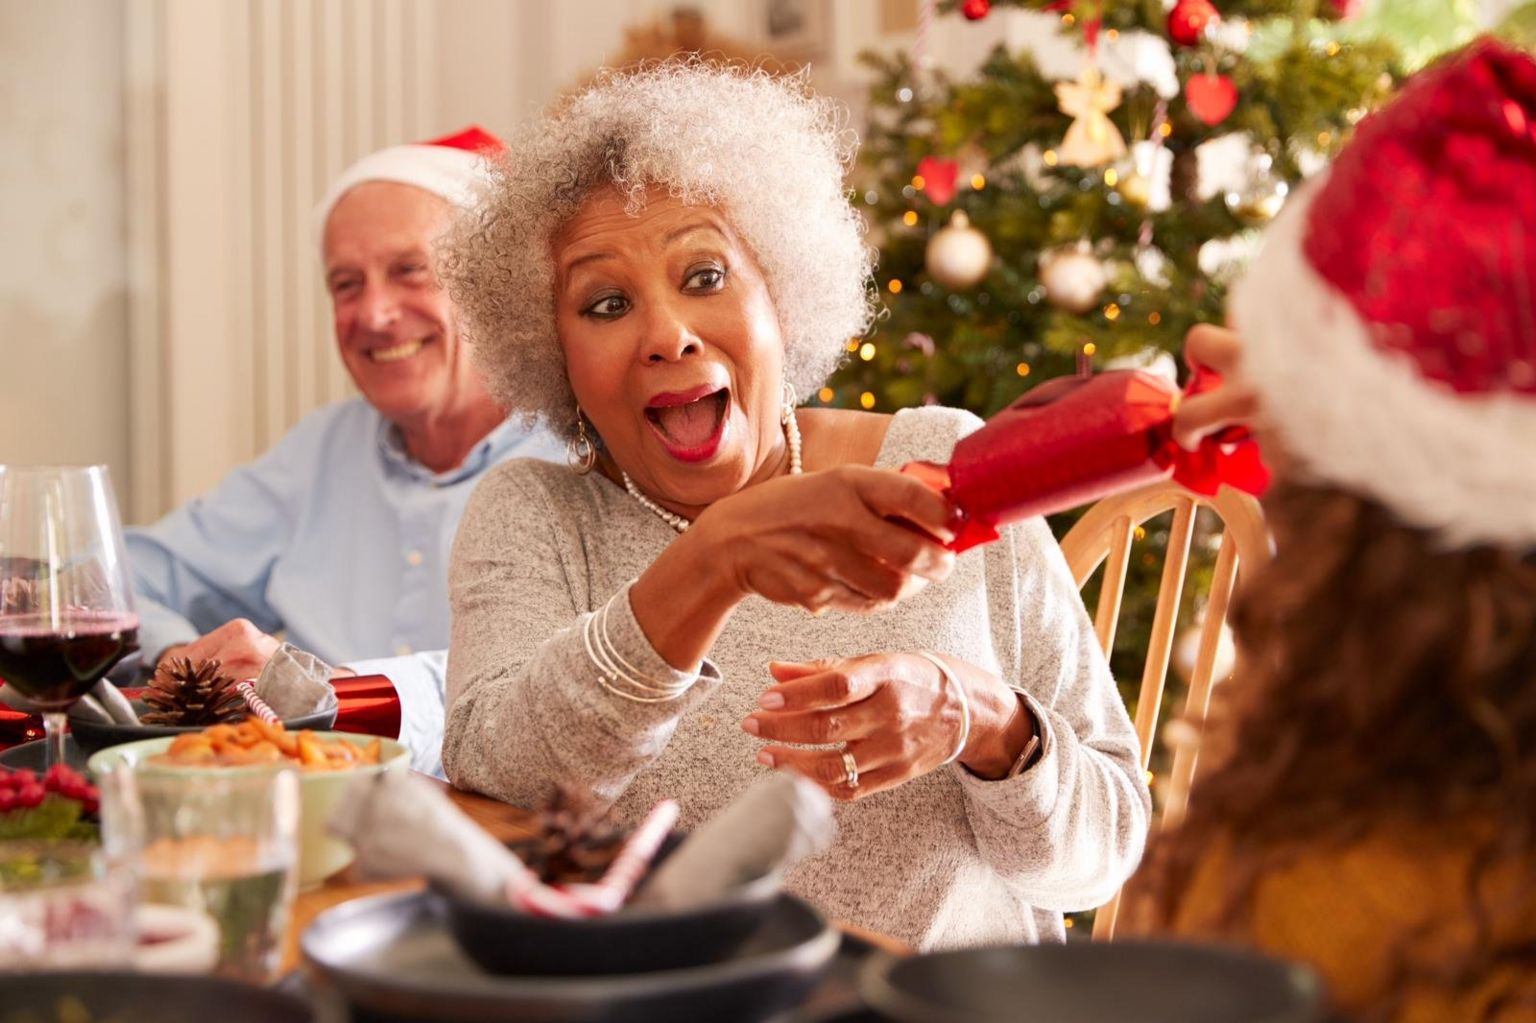 Grandmother Pulling Christmas Cracker With Granddaughter As They Sit For Meal At Table